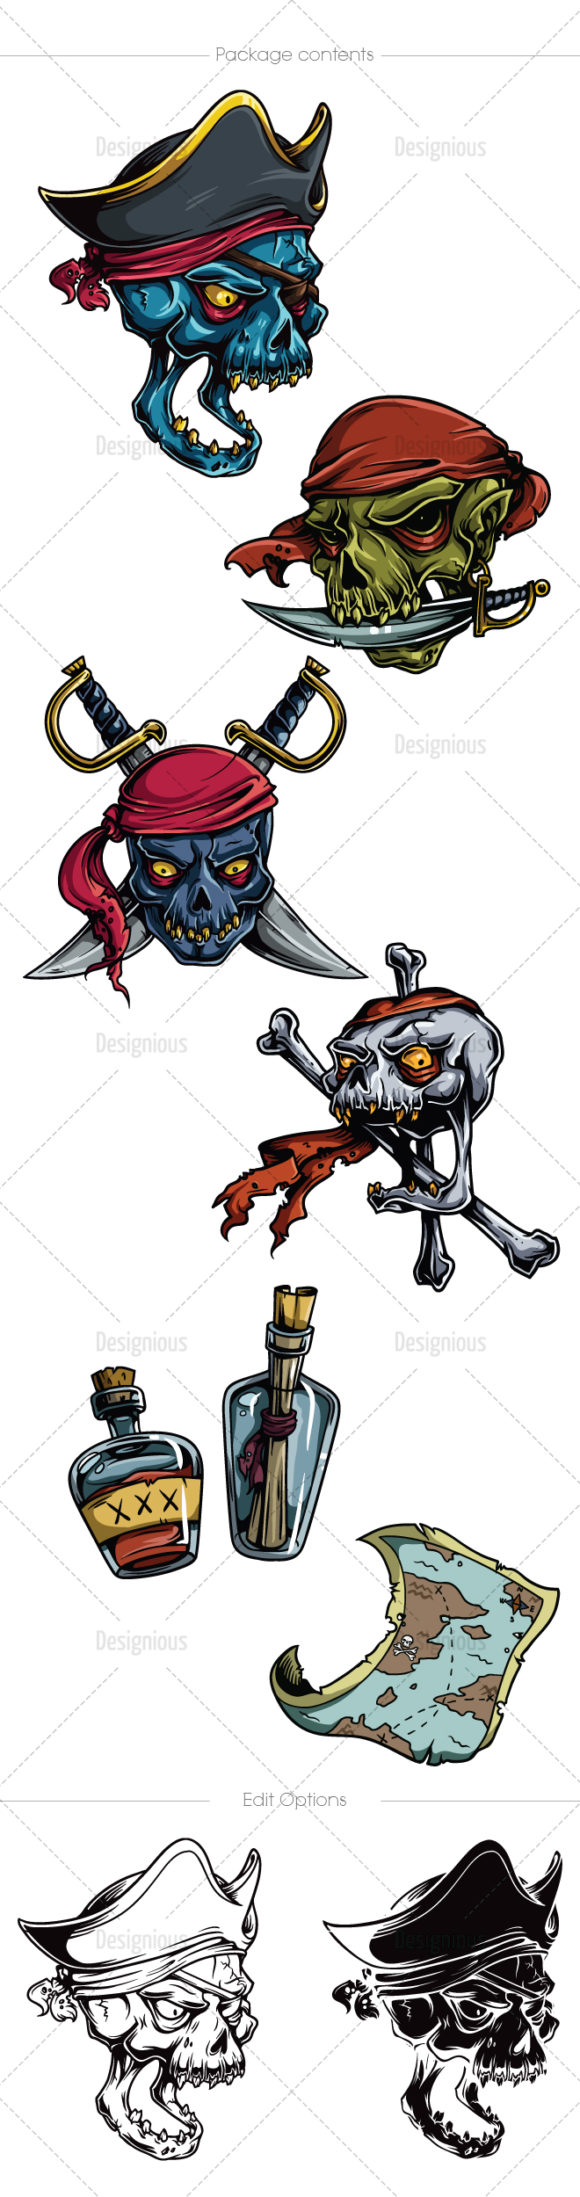 Pirates Vector Pack 1 2